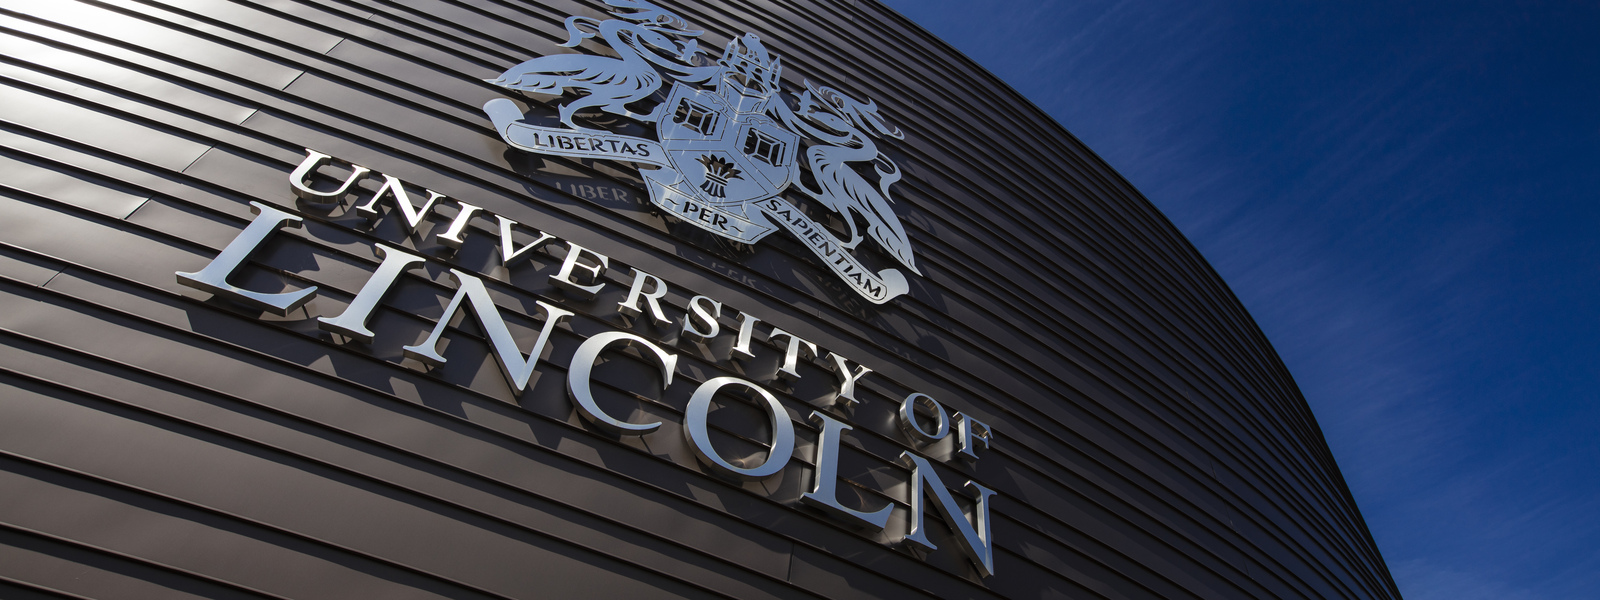 An exterior image of the Isaac Newton Building and University of Lincoln crest